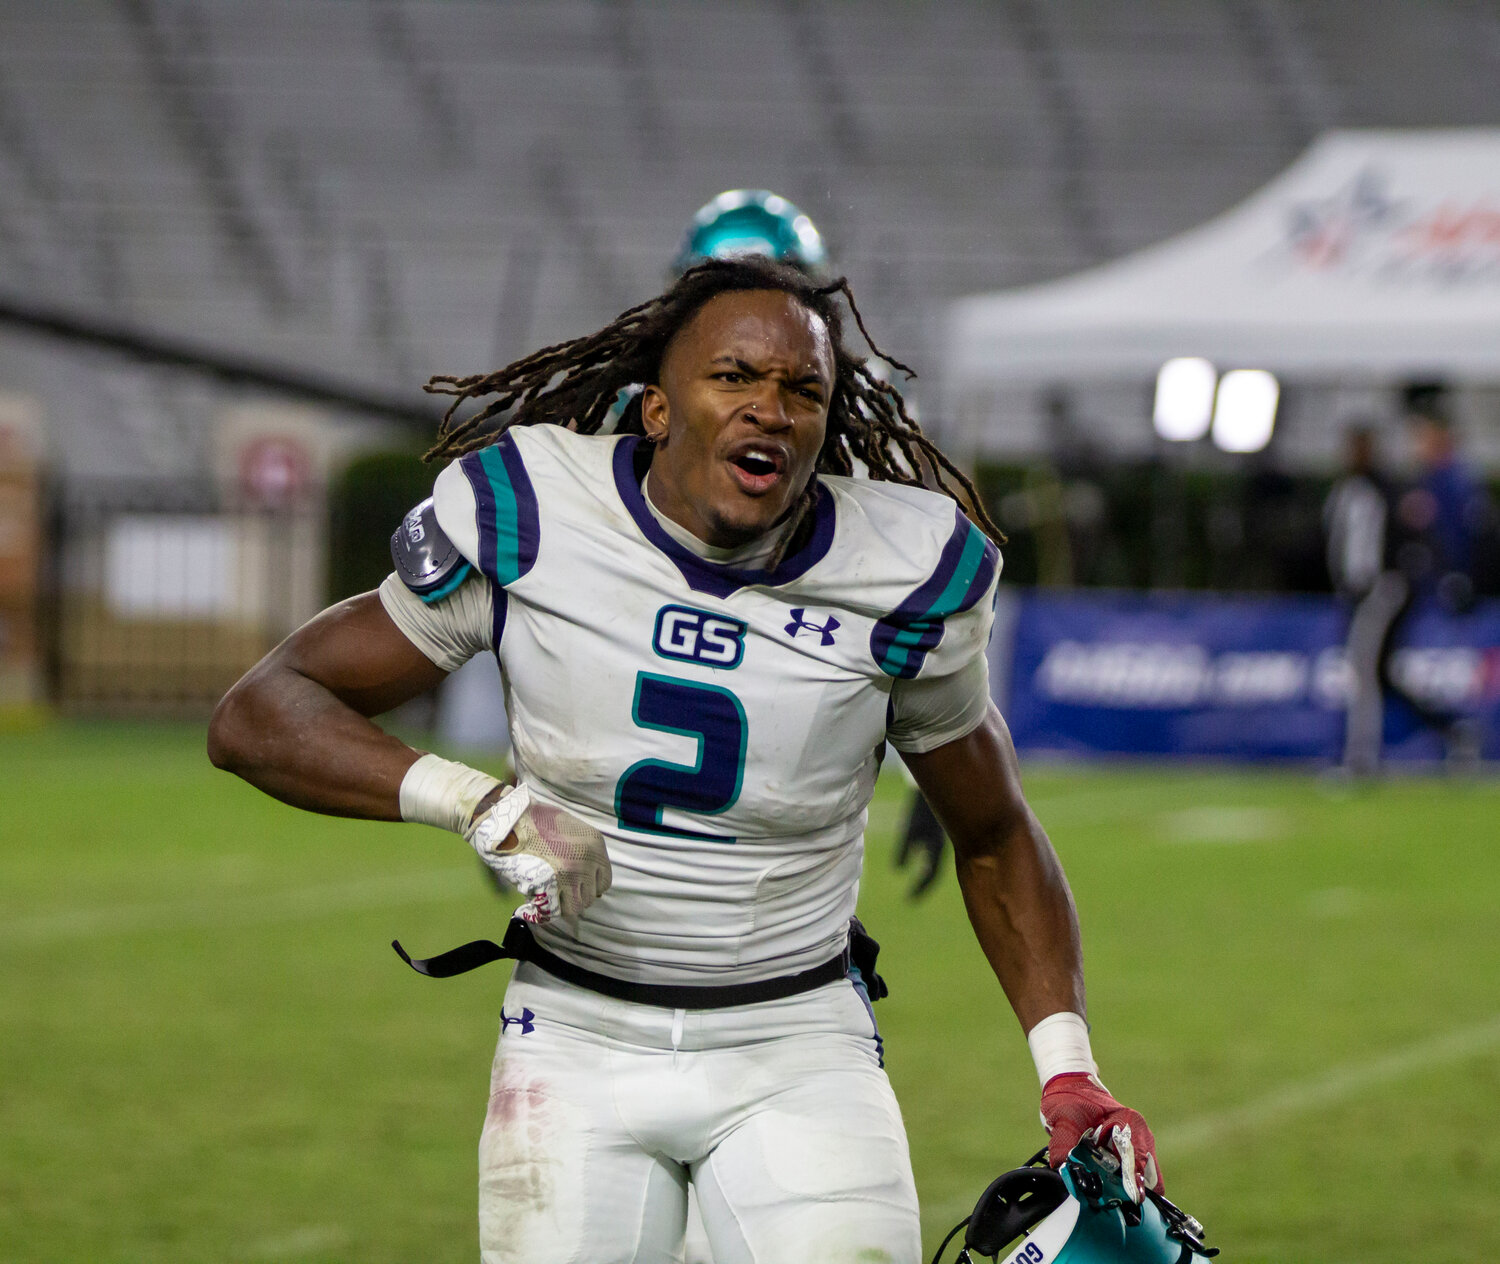 Ronnie Royal celebrates a one-handed interception that killed a Ramsay drive in the second half of Thursday’s Class 5A state title game between Gulf Shores and Ramsay in Tuscaloosa. Royal collected 4 tackles and added 188 rushing yards with 2 touchdowns on offense to help the Dolphins claim their first Blue Map 21-14.